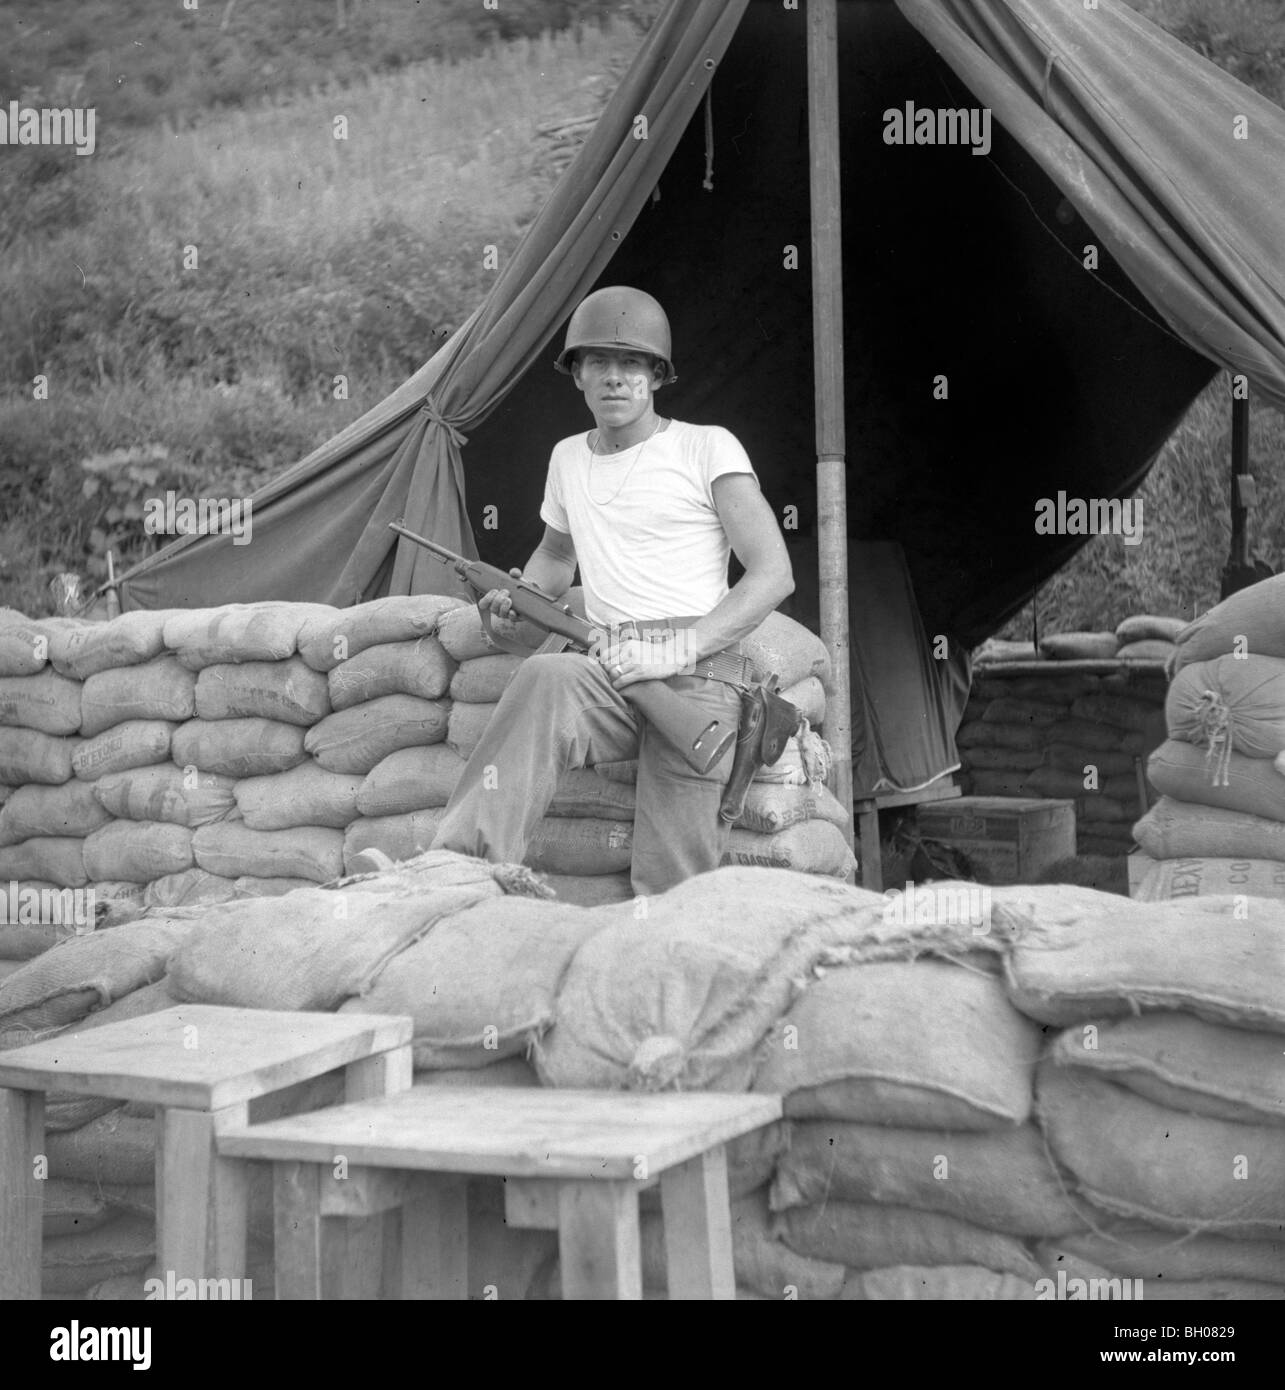 A United States Soldier of the Second Infantry Division holds an M1 rifle while standing next to a tent during the Korean War. Stock Photo